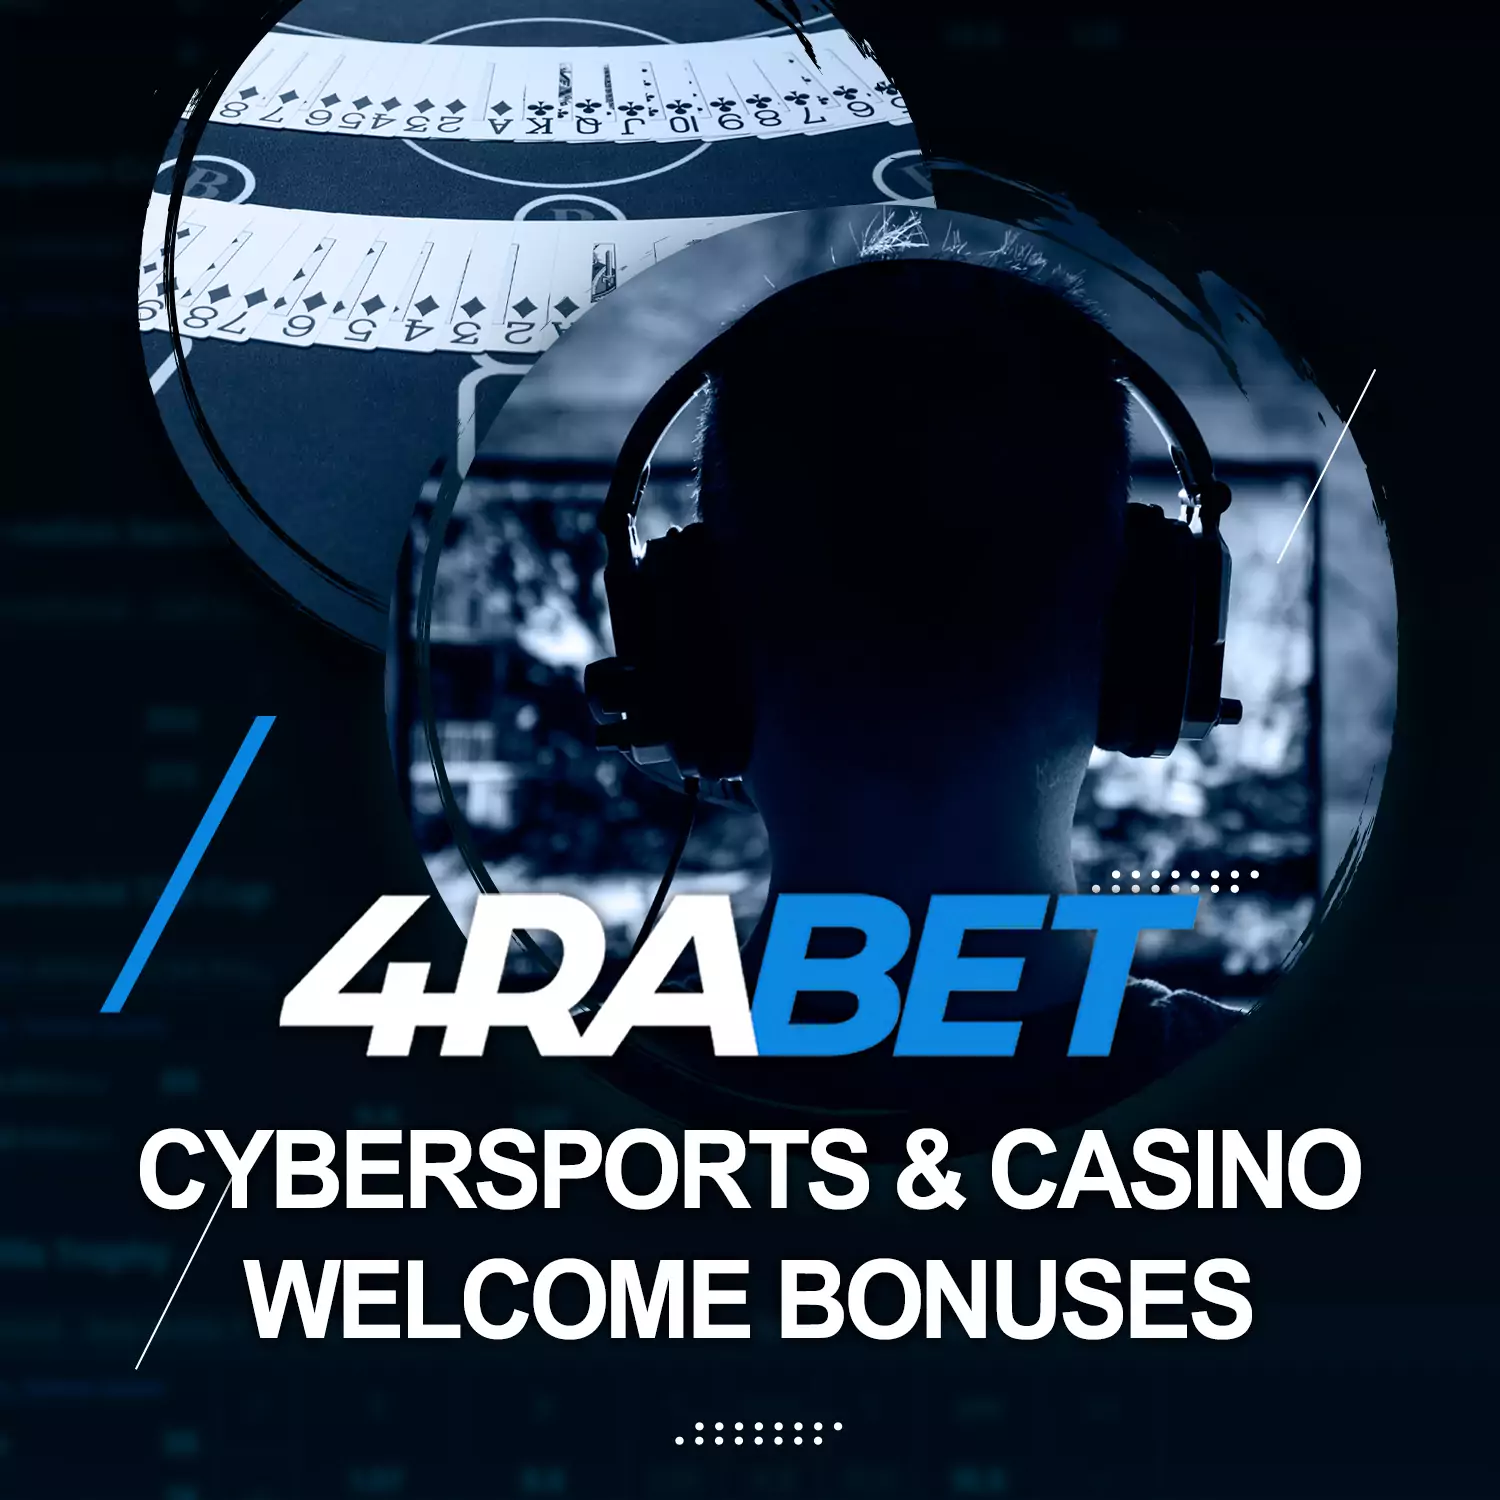 On 4rabet you can get a welcome bonus for cybersports betting or playing casino games.